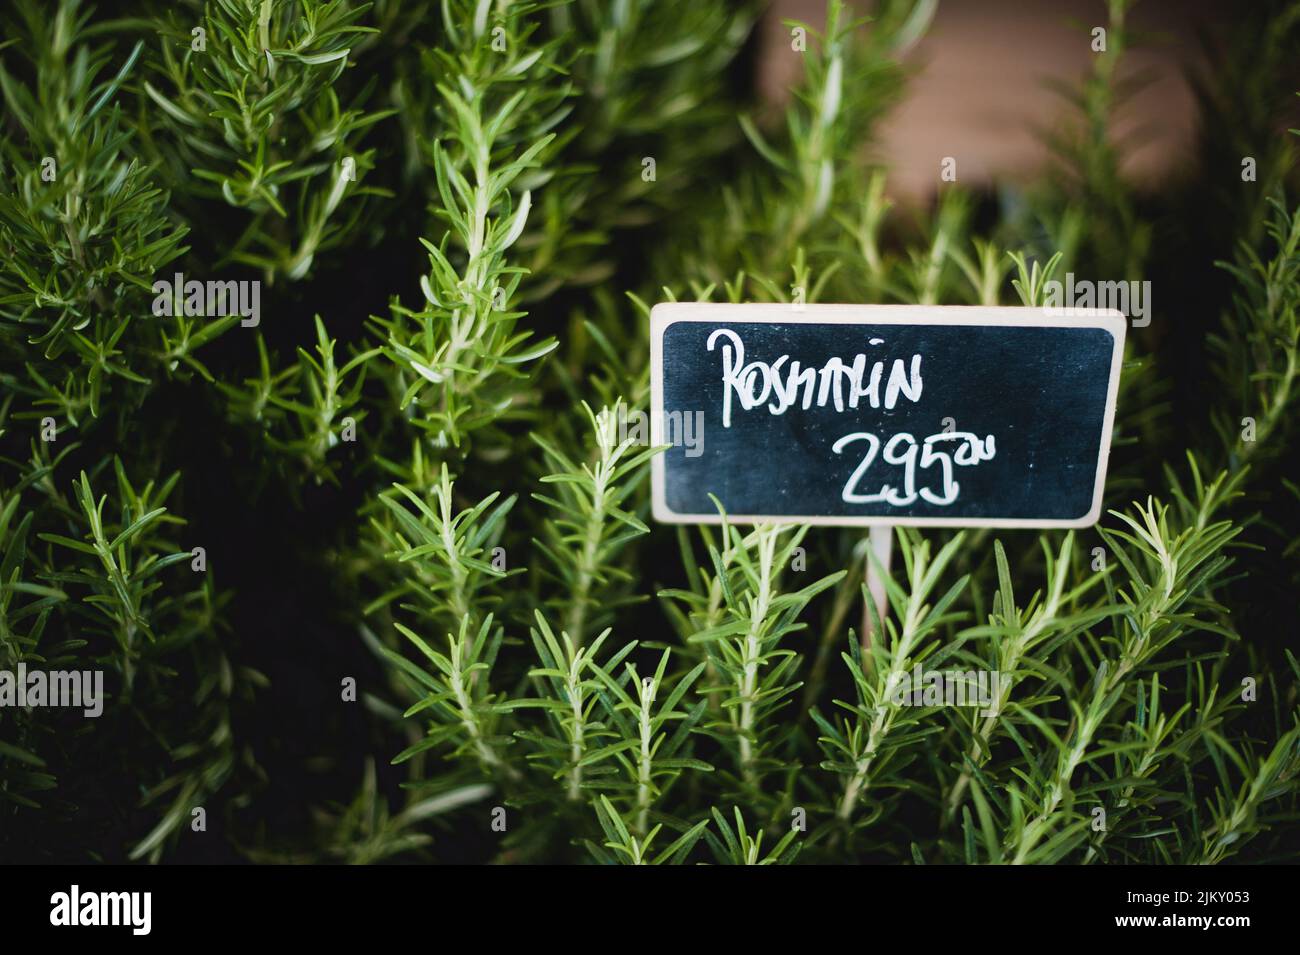 A closeup shot of growing rosemary plants on market Stock Photo